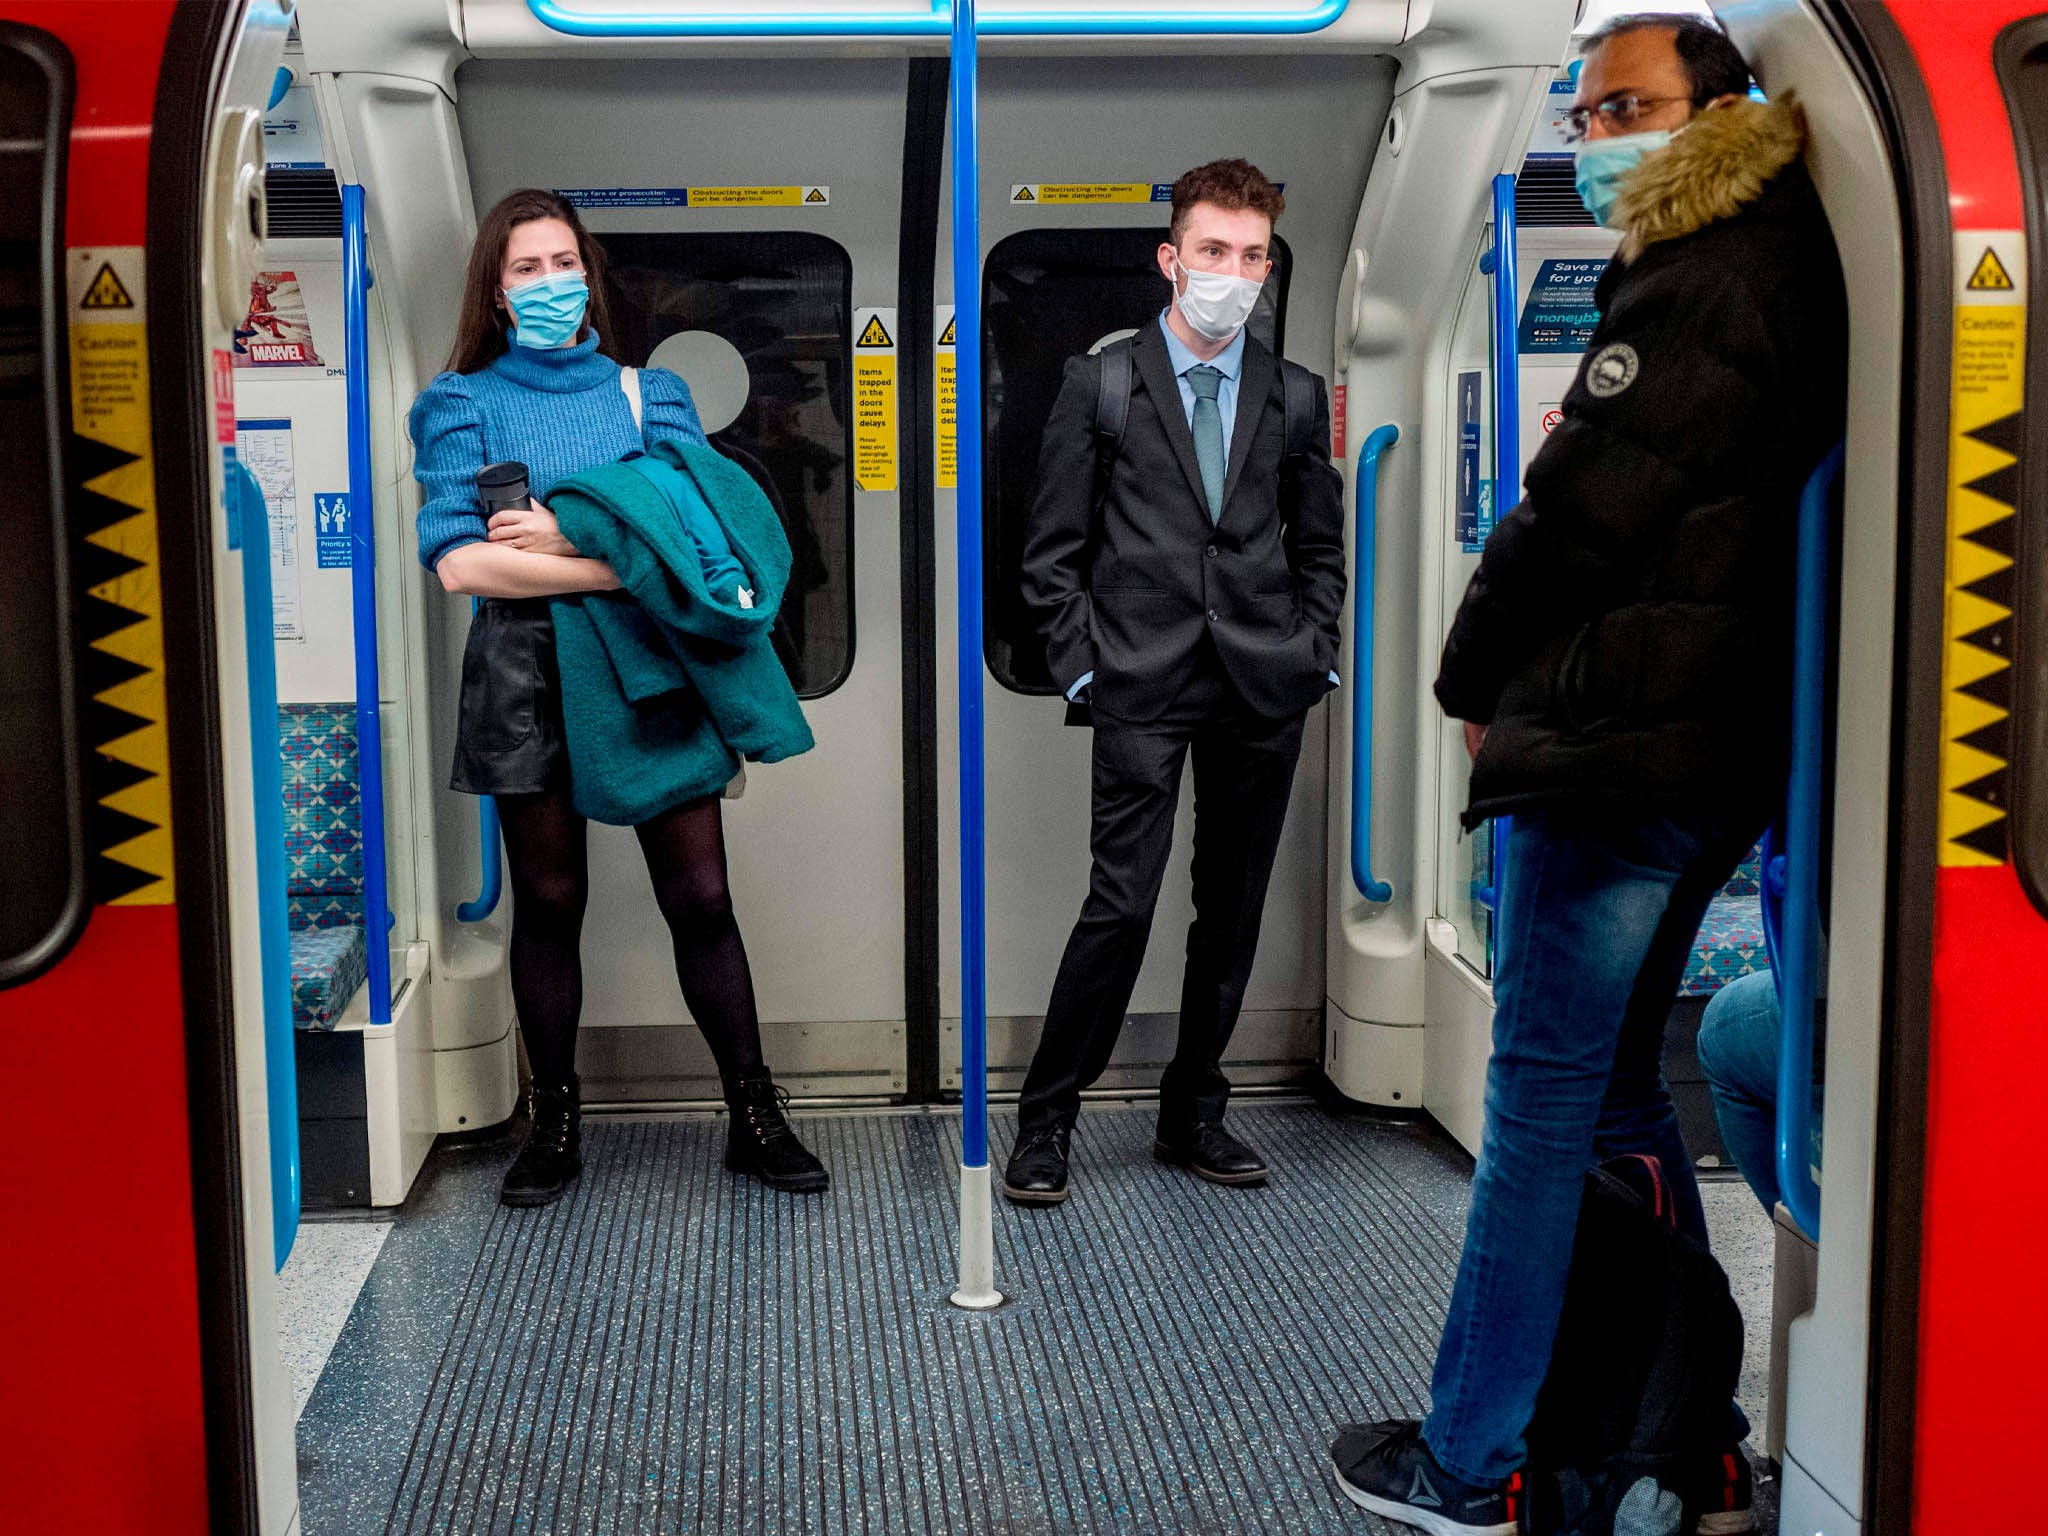 Swabs were taken from escalators, handrails, bus shelters and Oyster Card readers